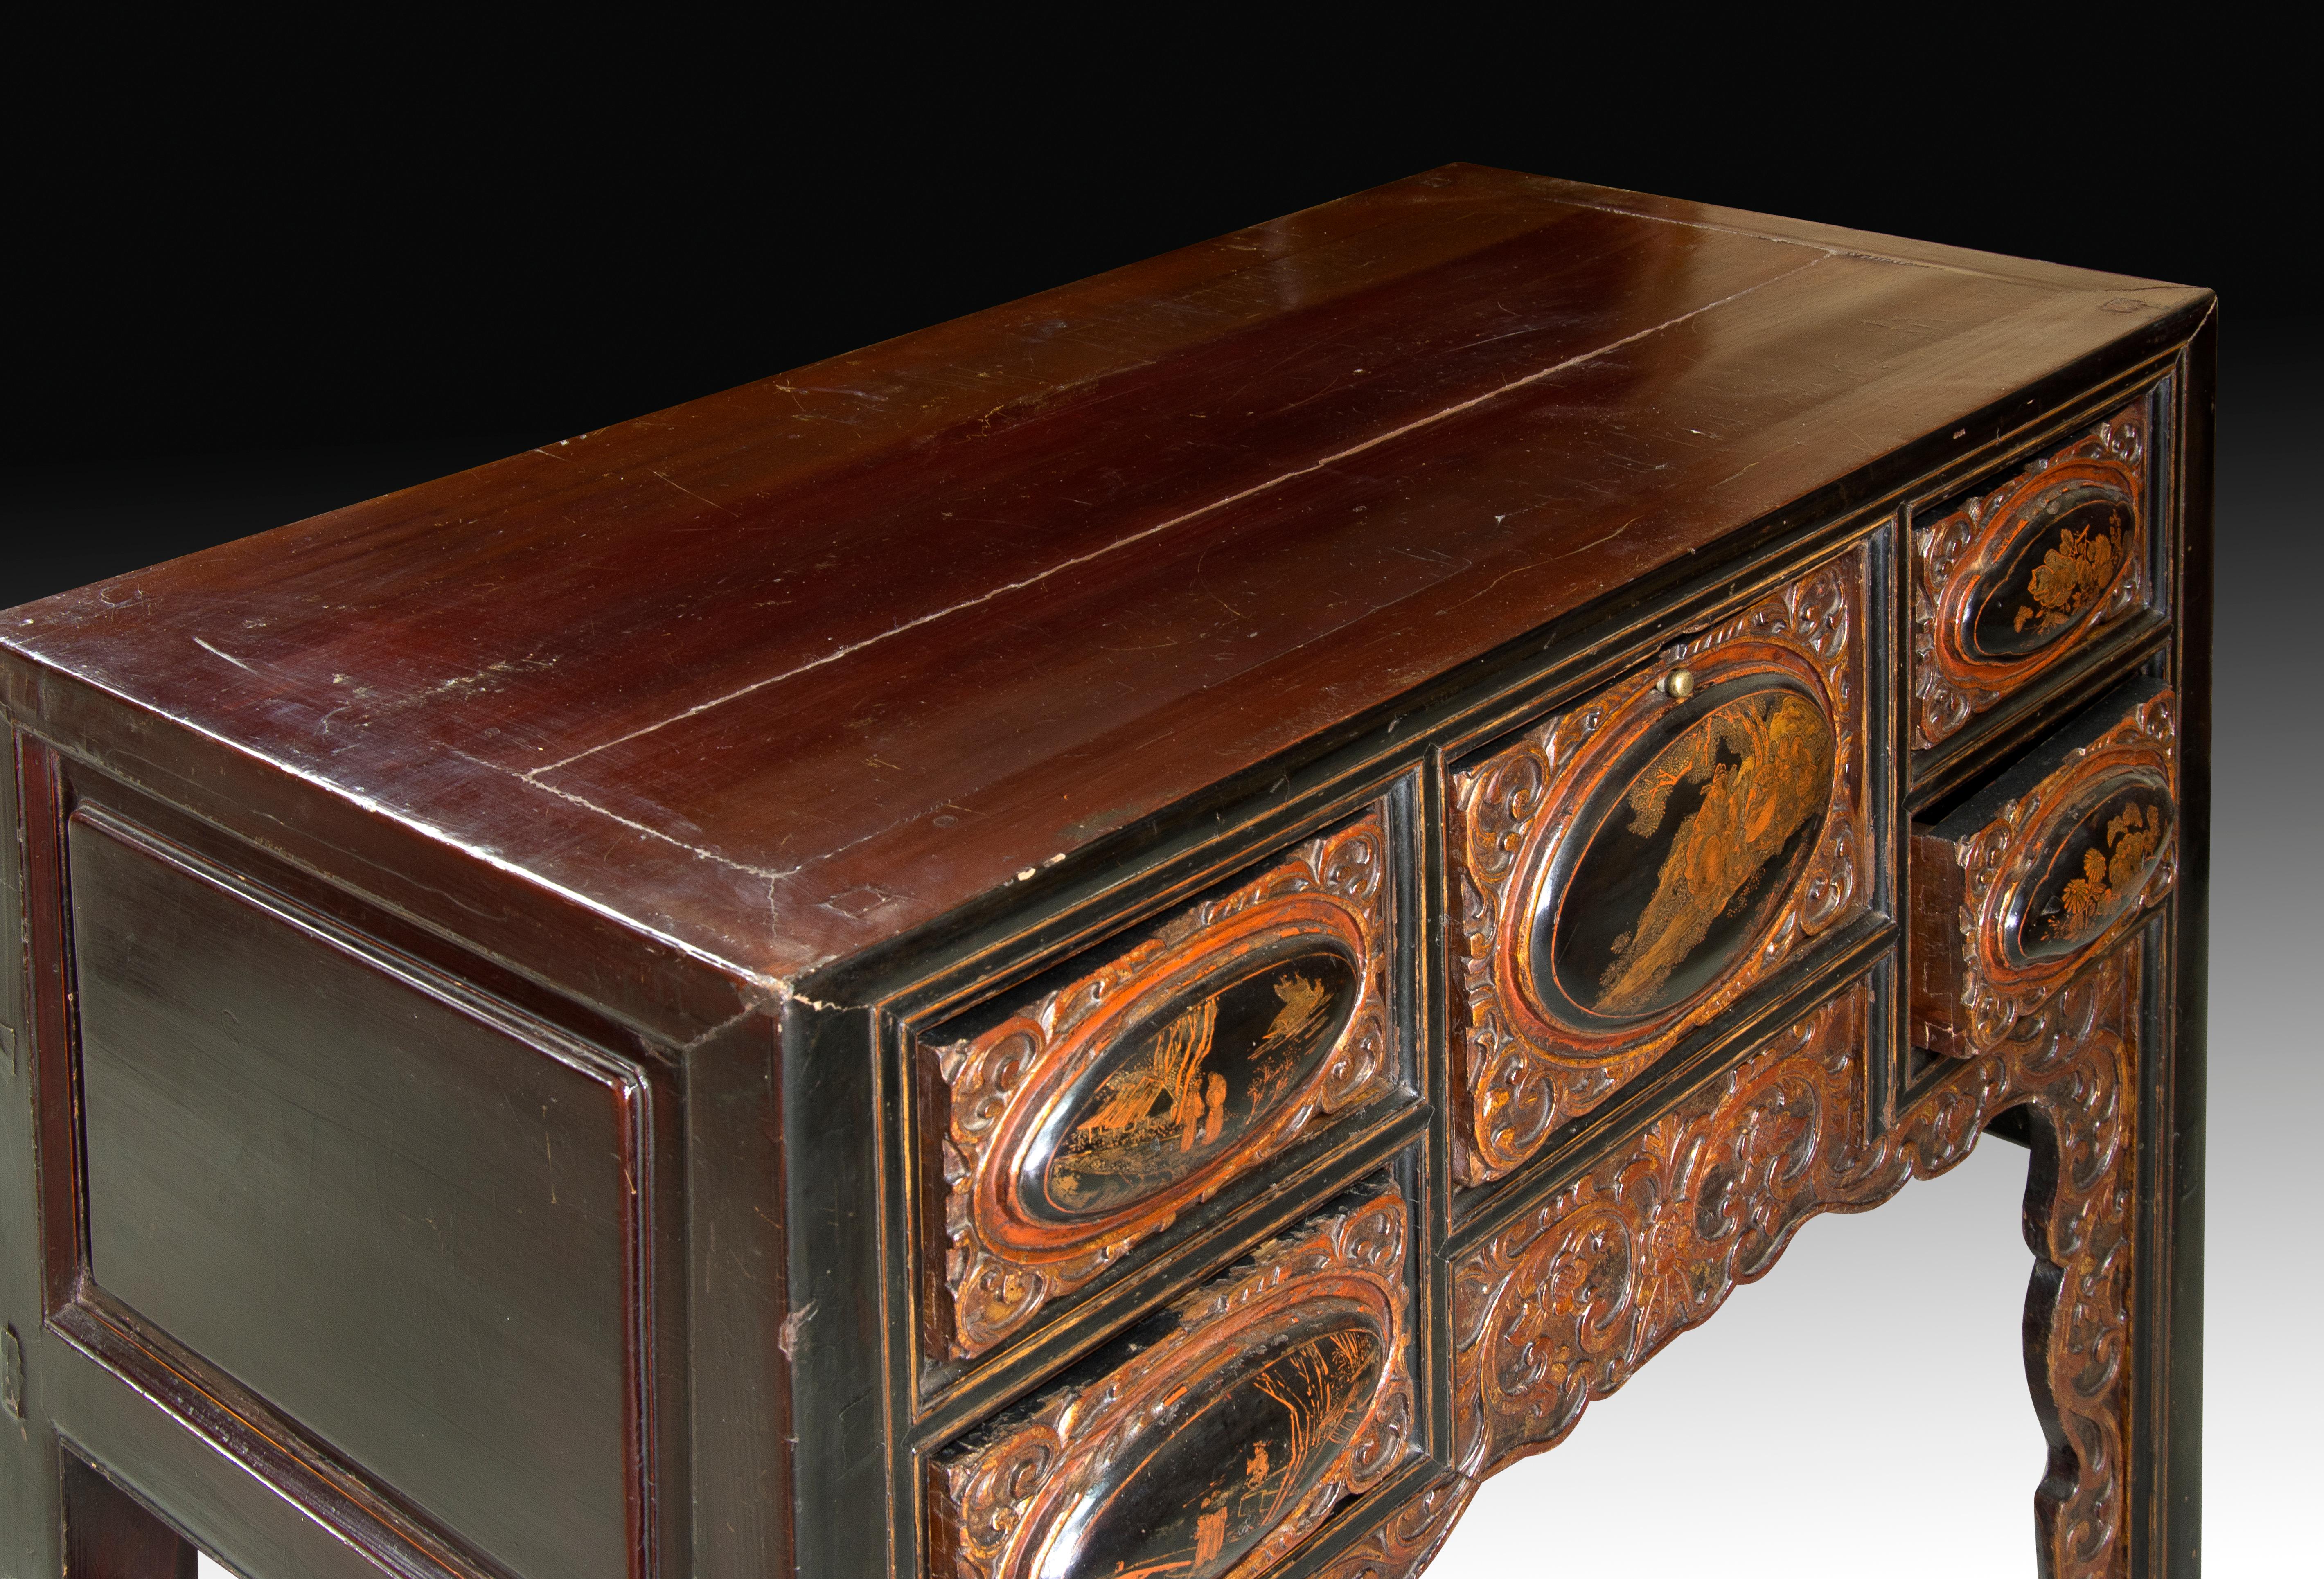 Rectangular and straight upper board furniture decorated on the sides with geometric elements and in front with an elaborate carved plant elements enhancing the ovals present in its five drawers, in which floral compositions and figurative scenes on